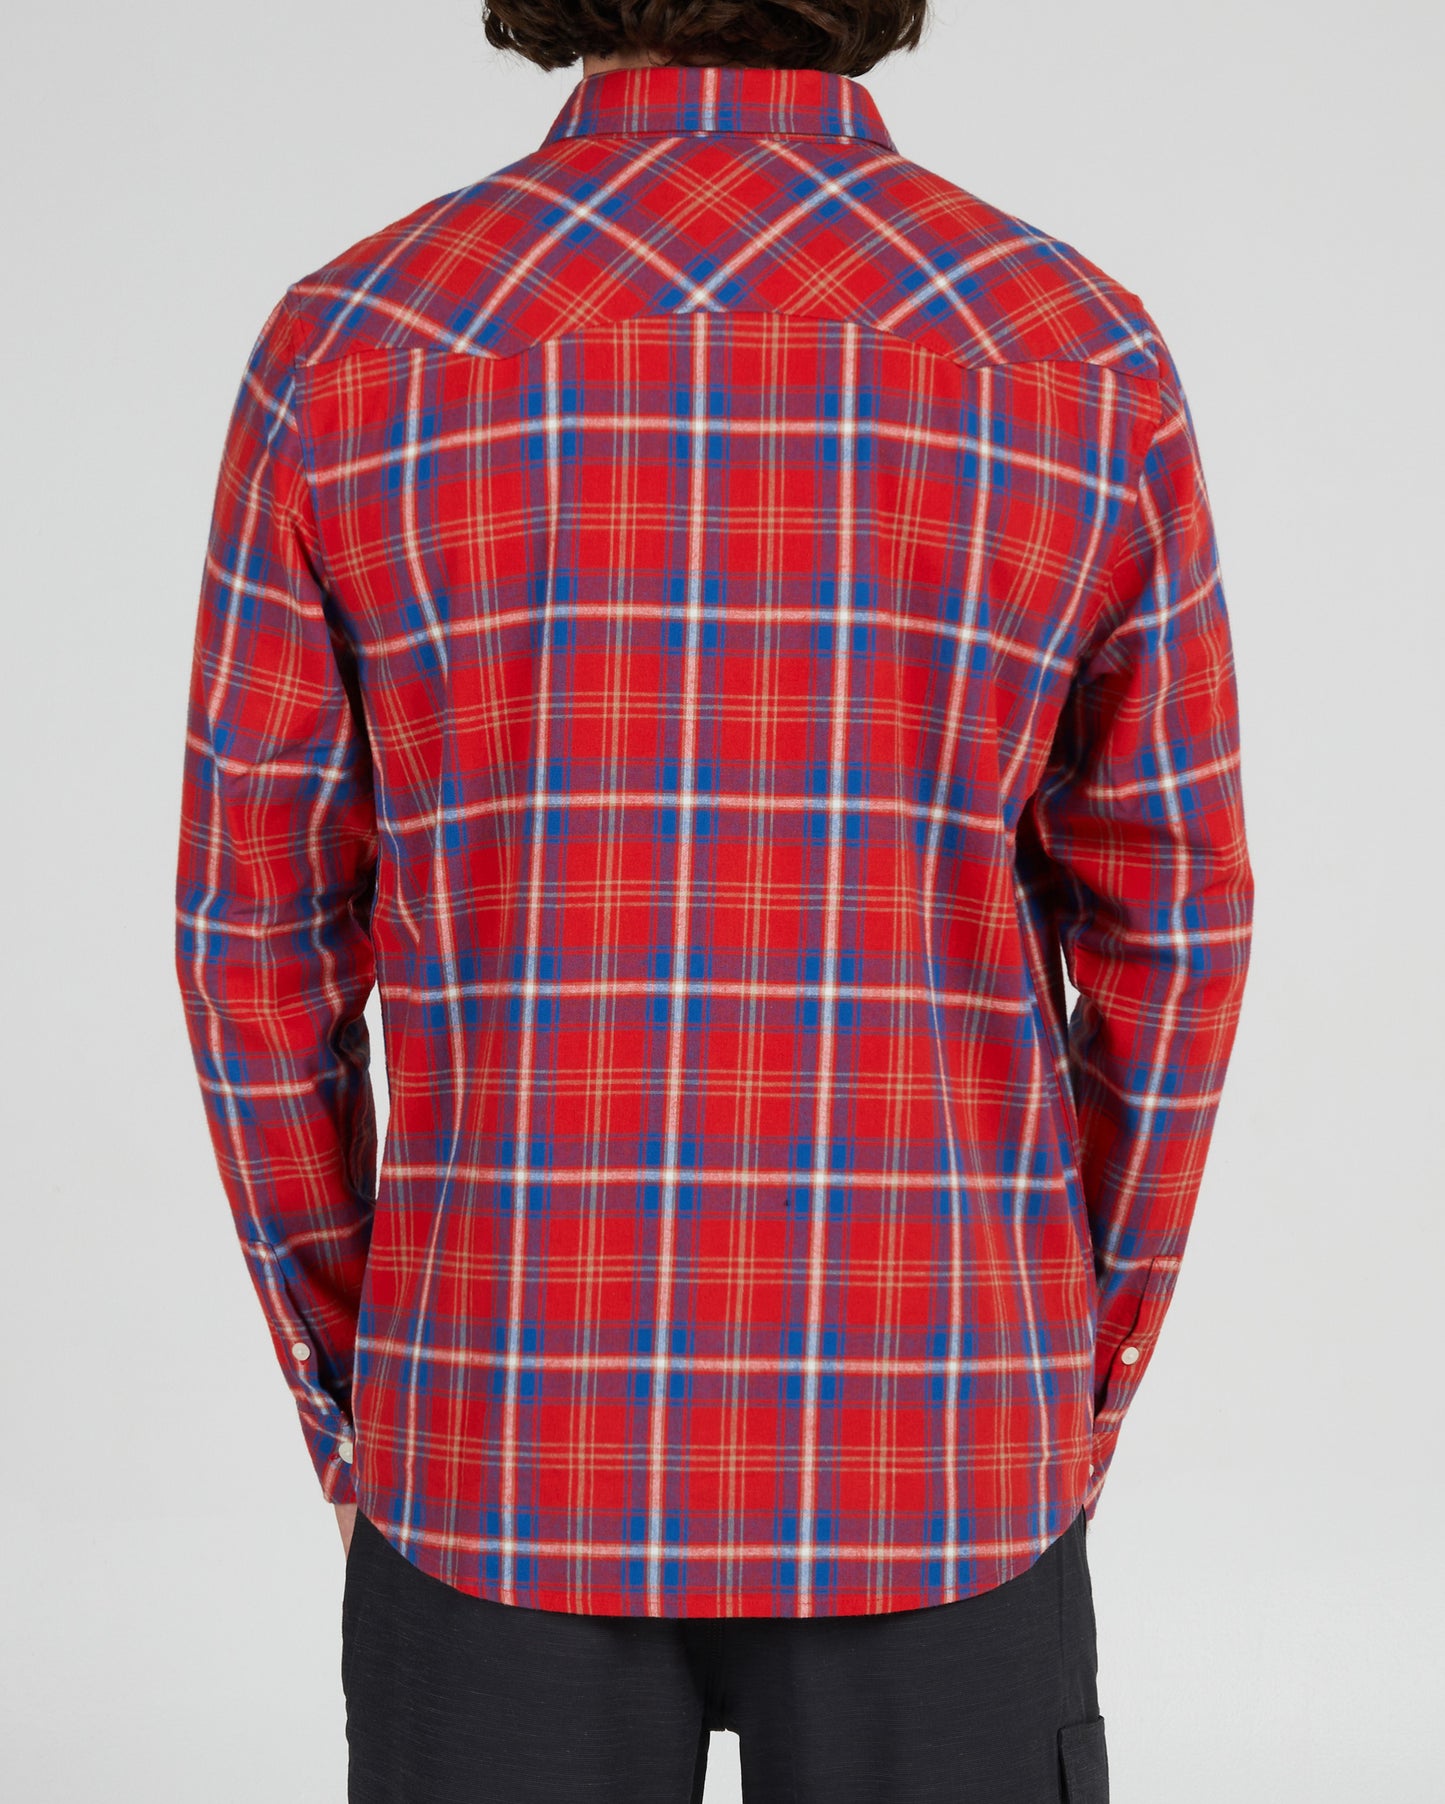 On body back of the Herdsman Red Flannel